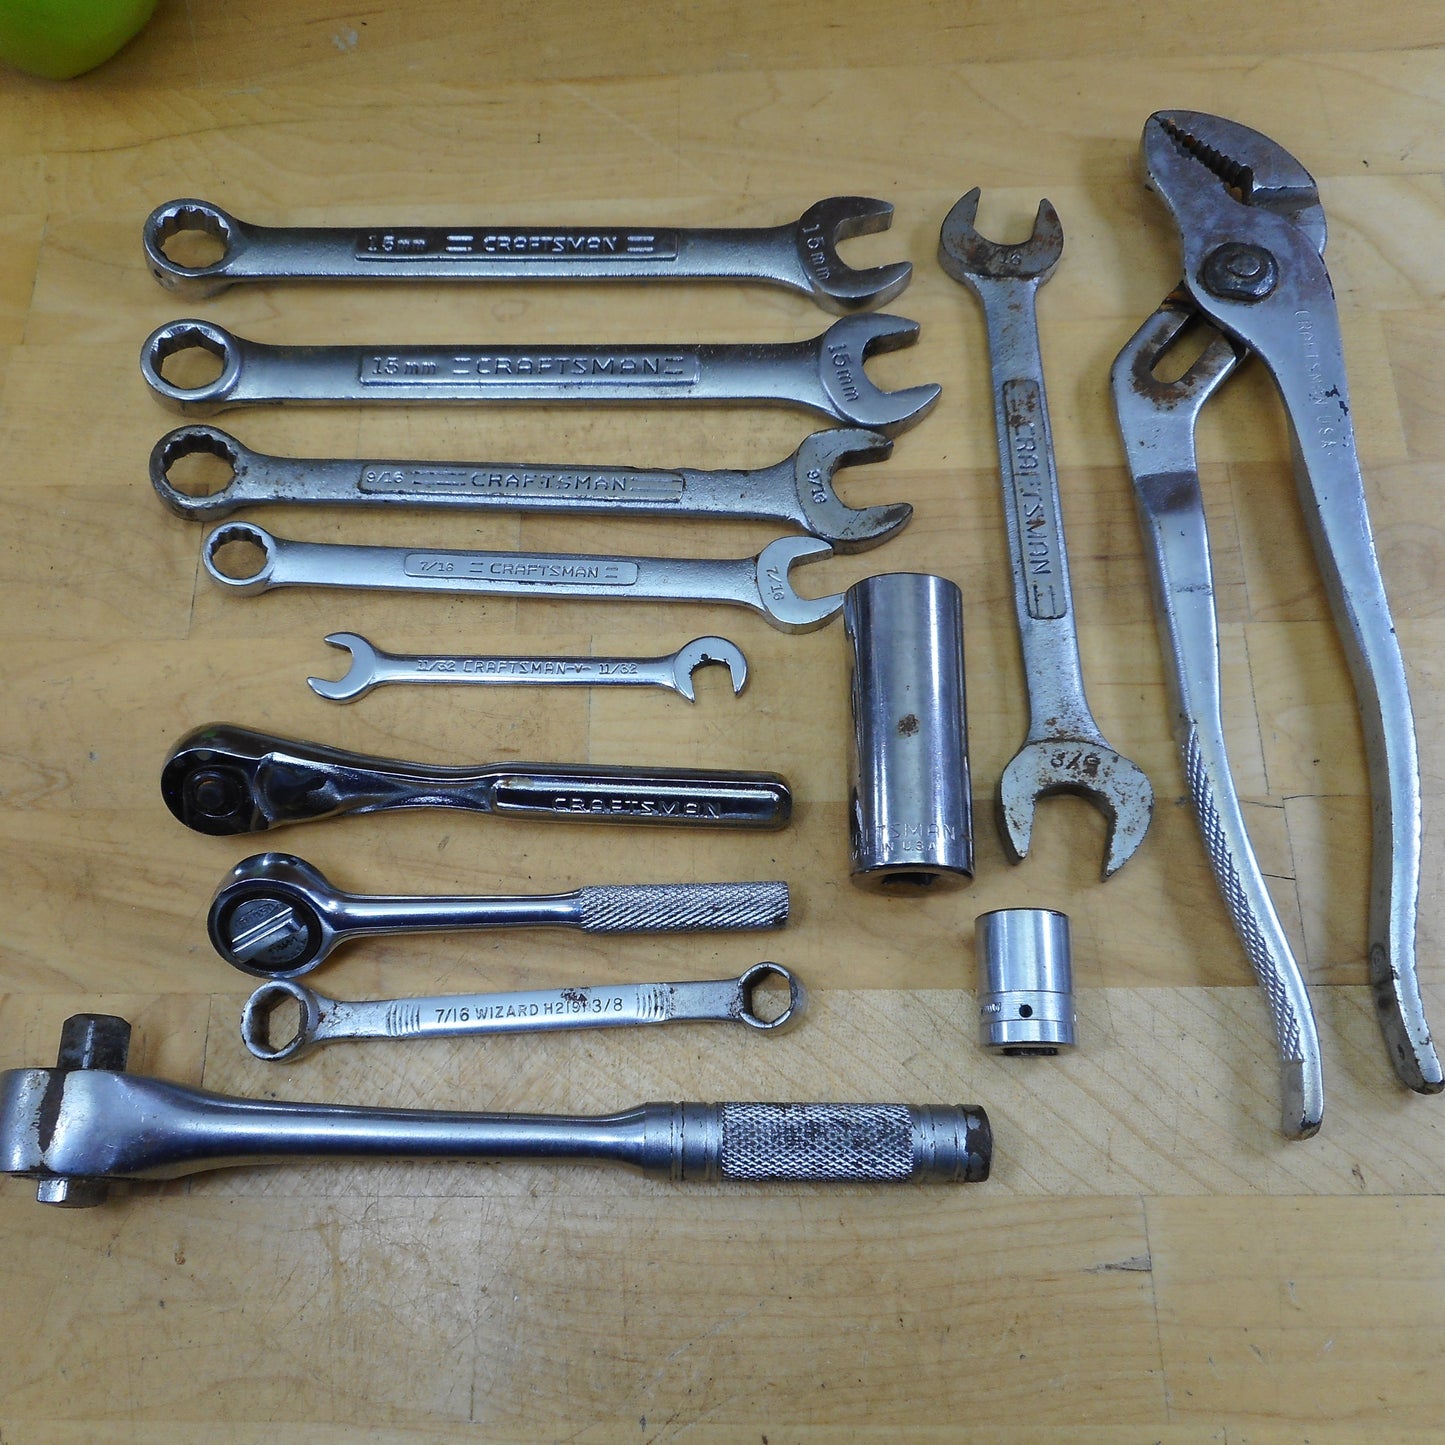 USA 13 Piece Tool lot Sockets Wrench Craftsman Wizard Armstrong Etc.